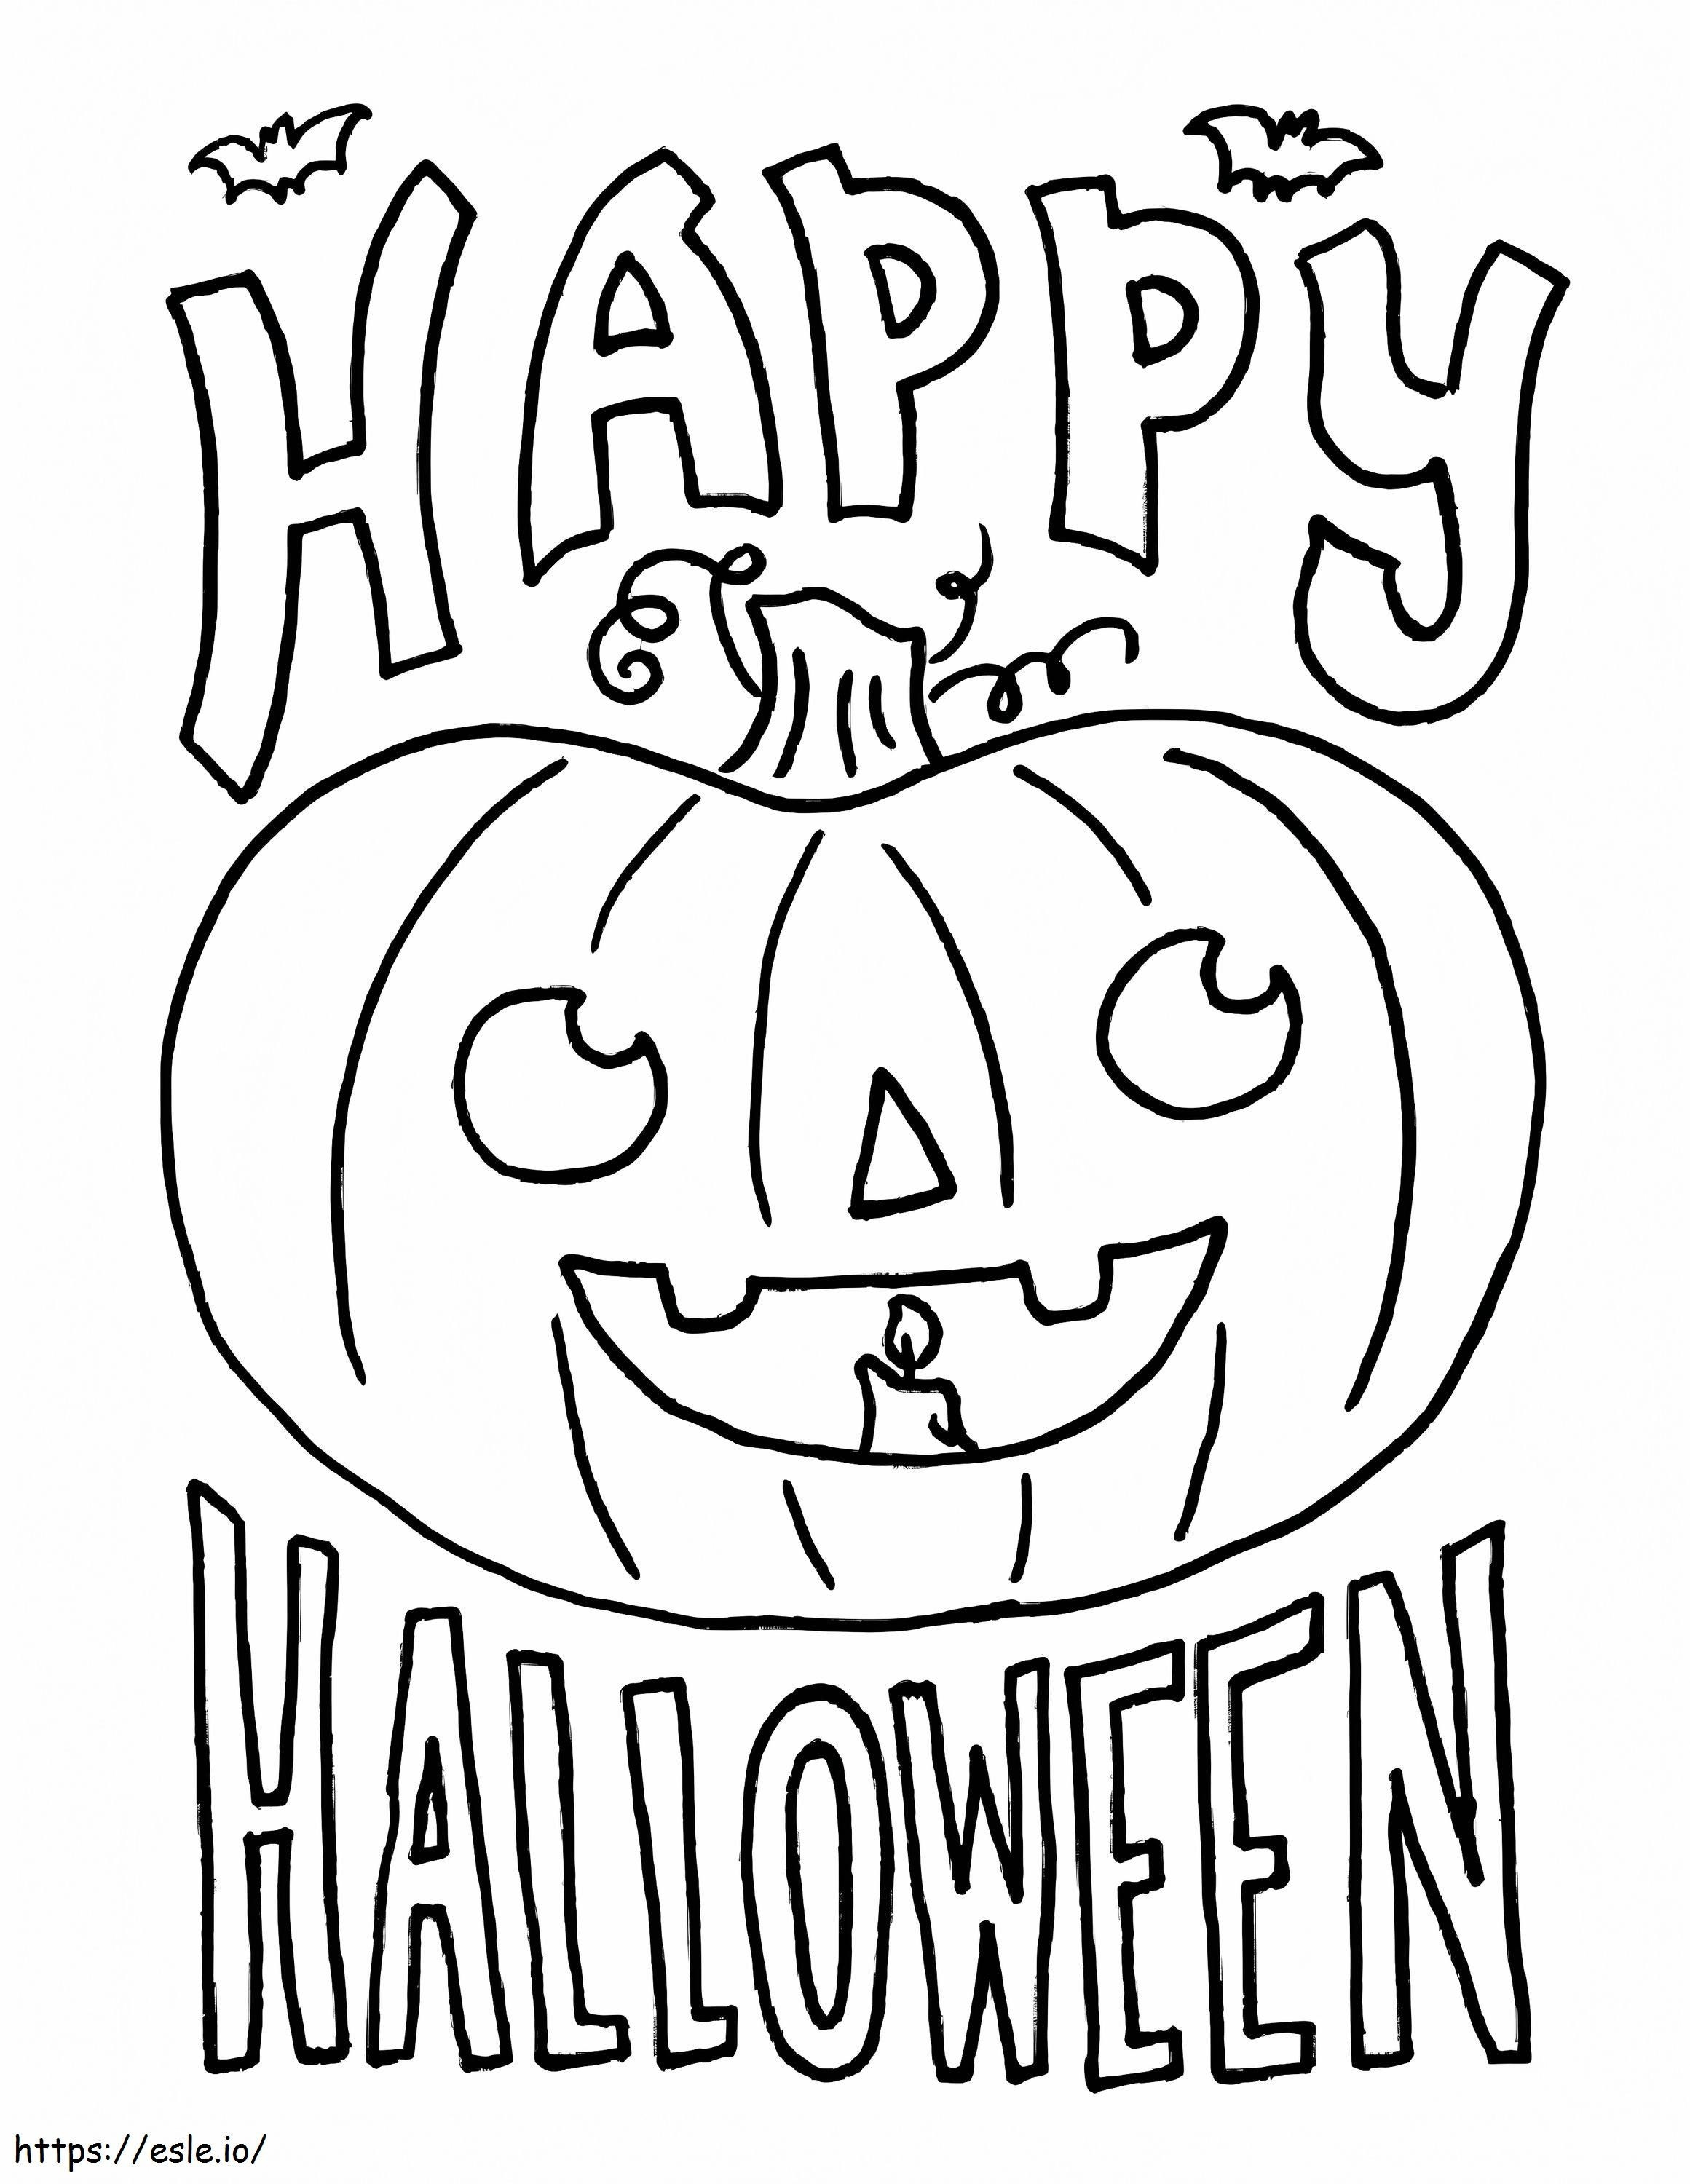 Happy Halloween With Pumpkin coloring page